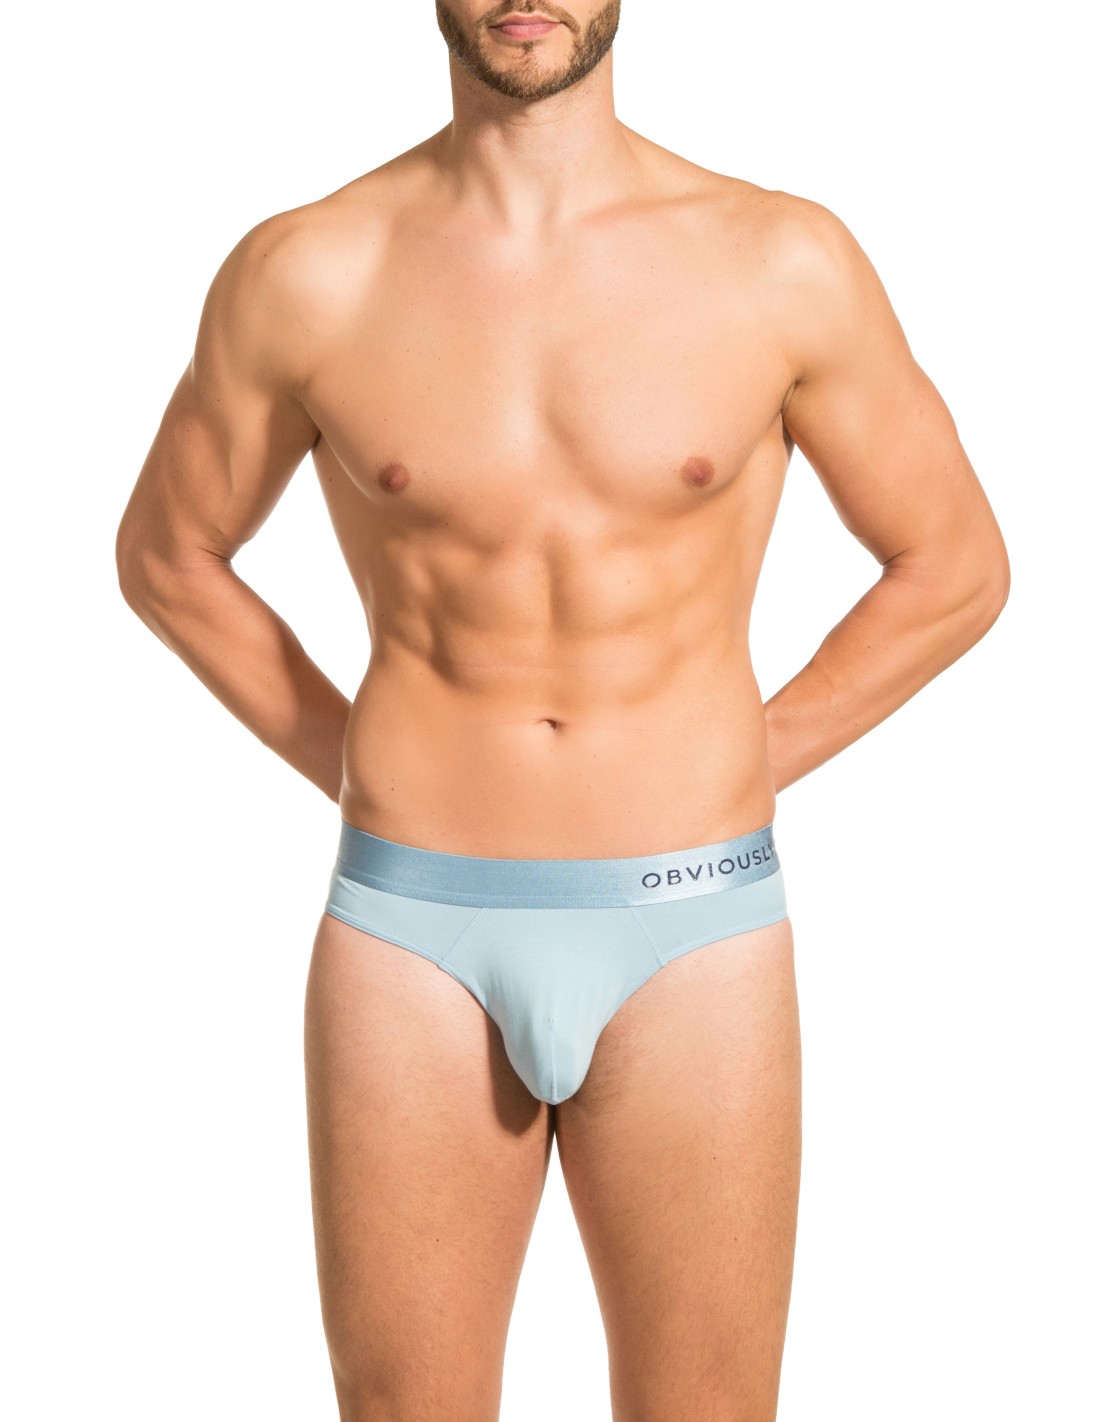 PrimeMan AnatoMAX Hipster Brief BLK XL by Obviously